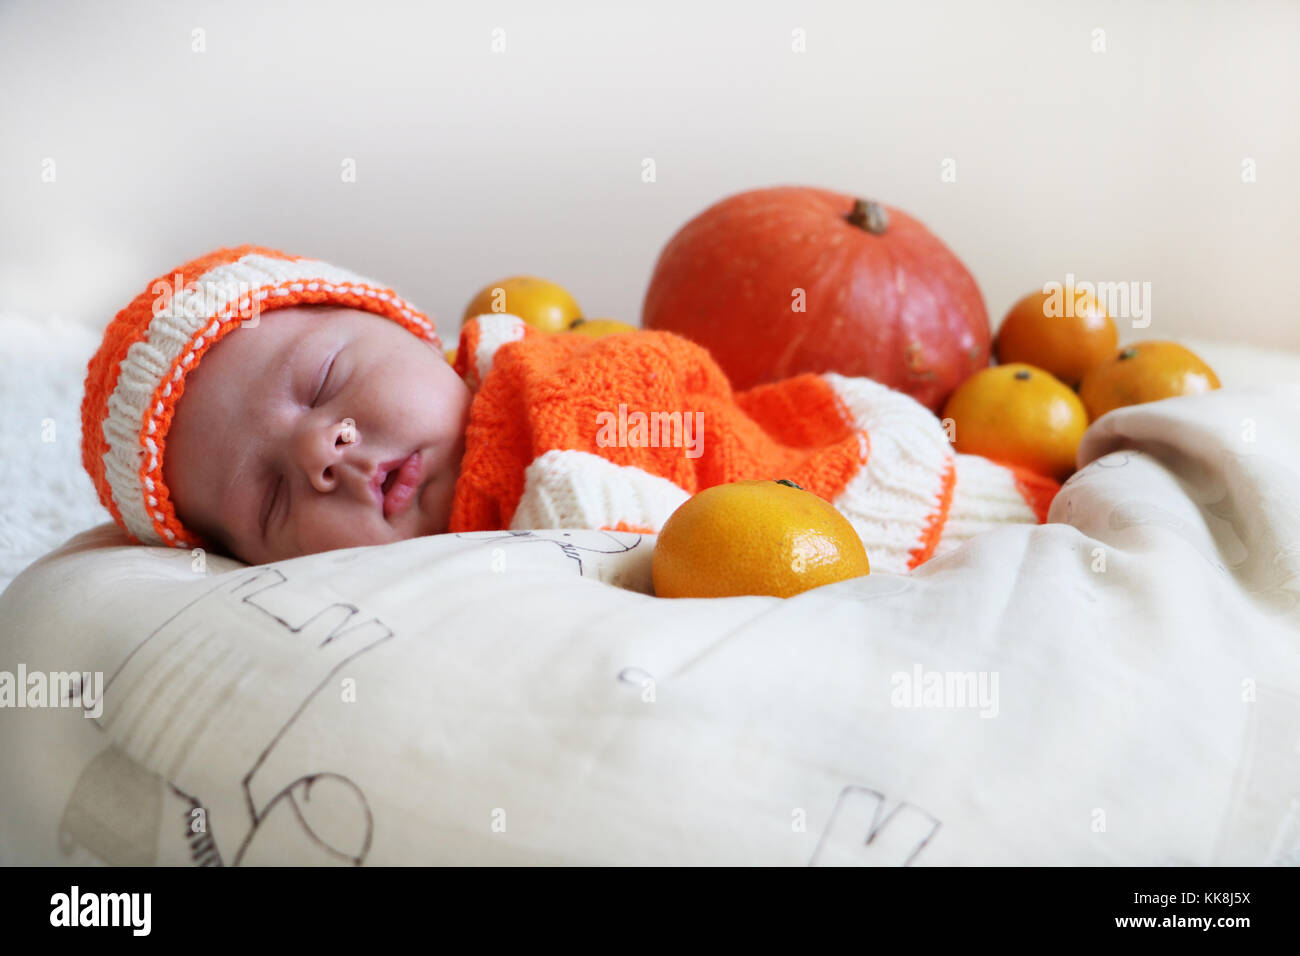 Cute sleeping newborn baby  in a knitted pumpkin or orange costume on pumpkin and oranges background. Autumn halloween or harvest concept. Stock Photo